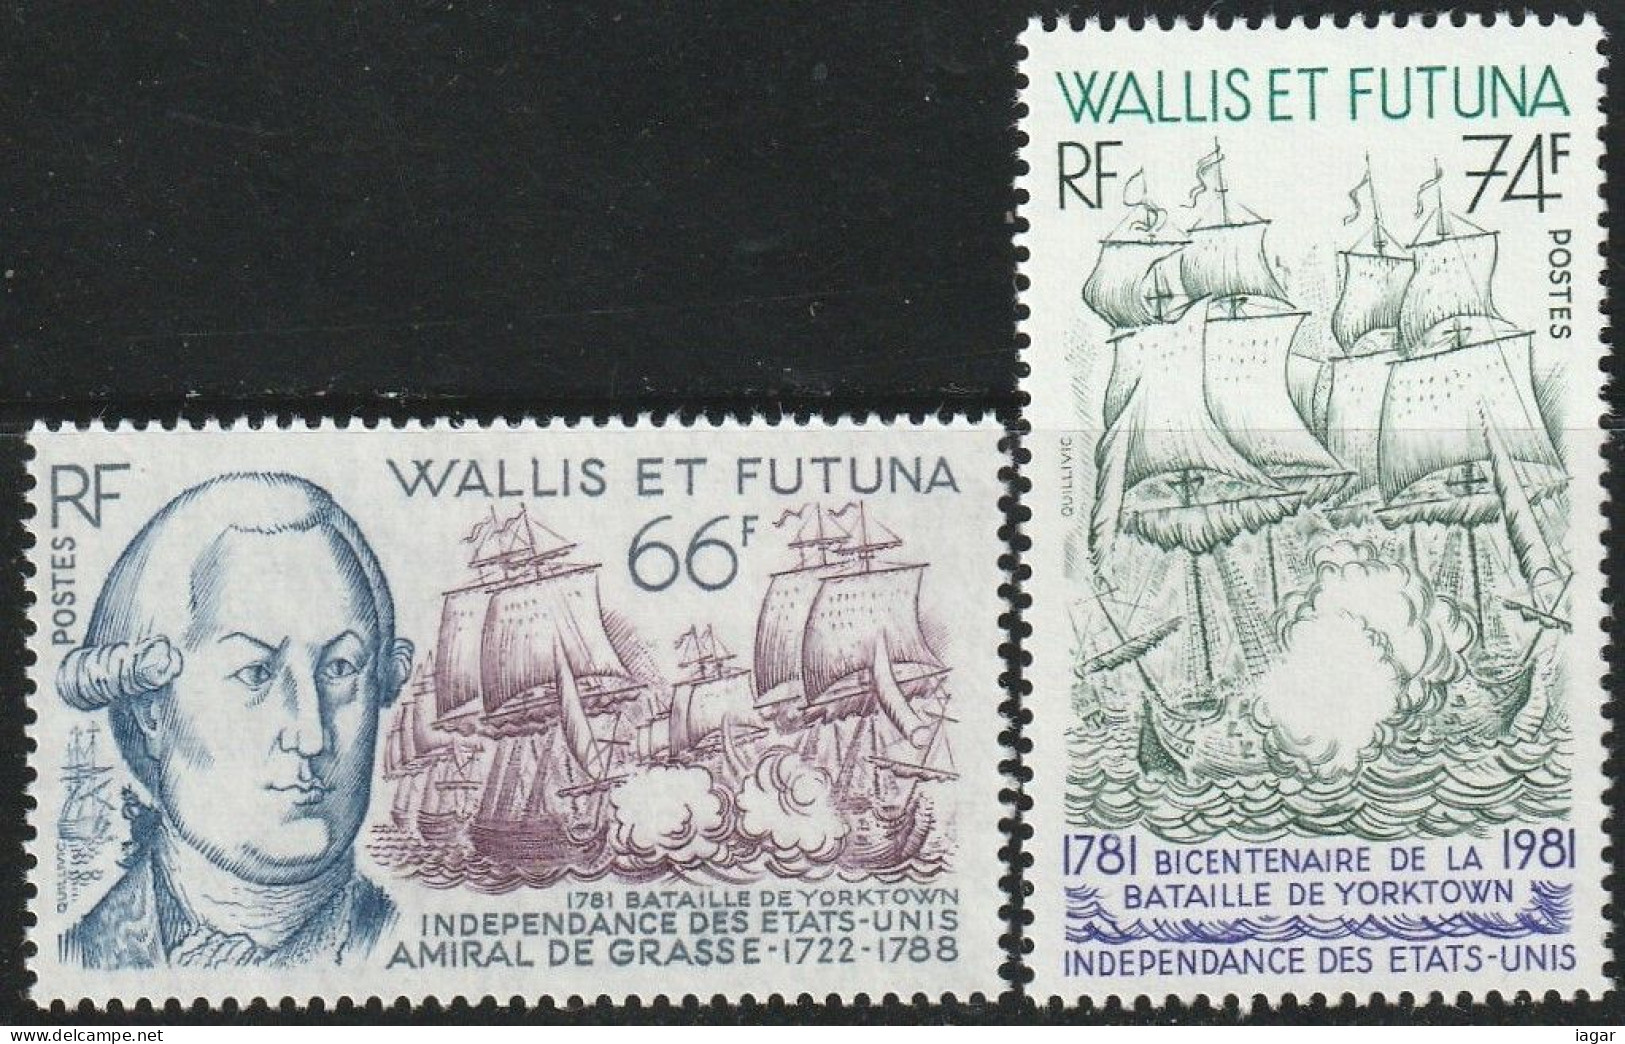 THEMATIC HISTORY:  INDEPENDENCE OF THE UNITED STATES, BATTLE OF YORKTOWN. ASPECTS OF NAVAL BATTLE  -  WALLIS AND FUTUNA - Indépendance USA